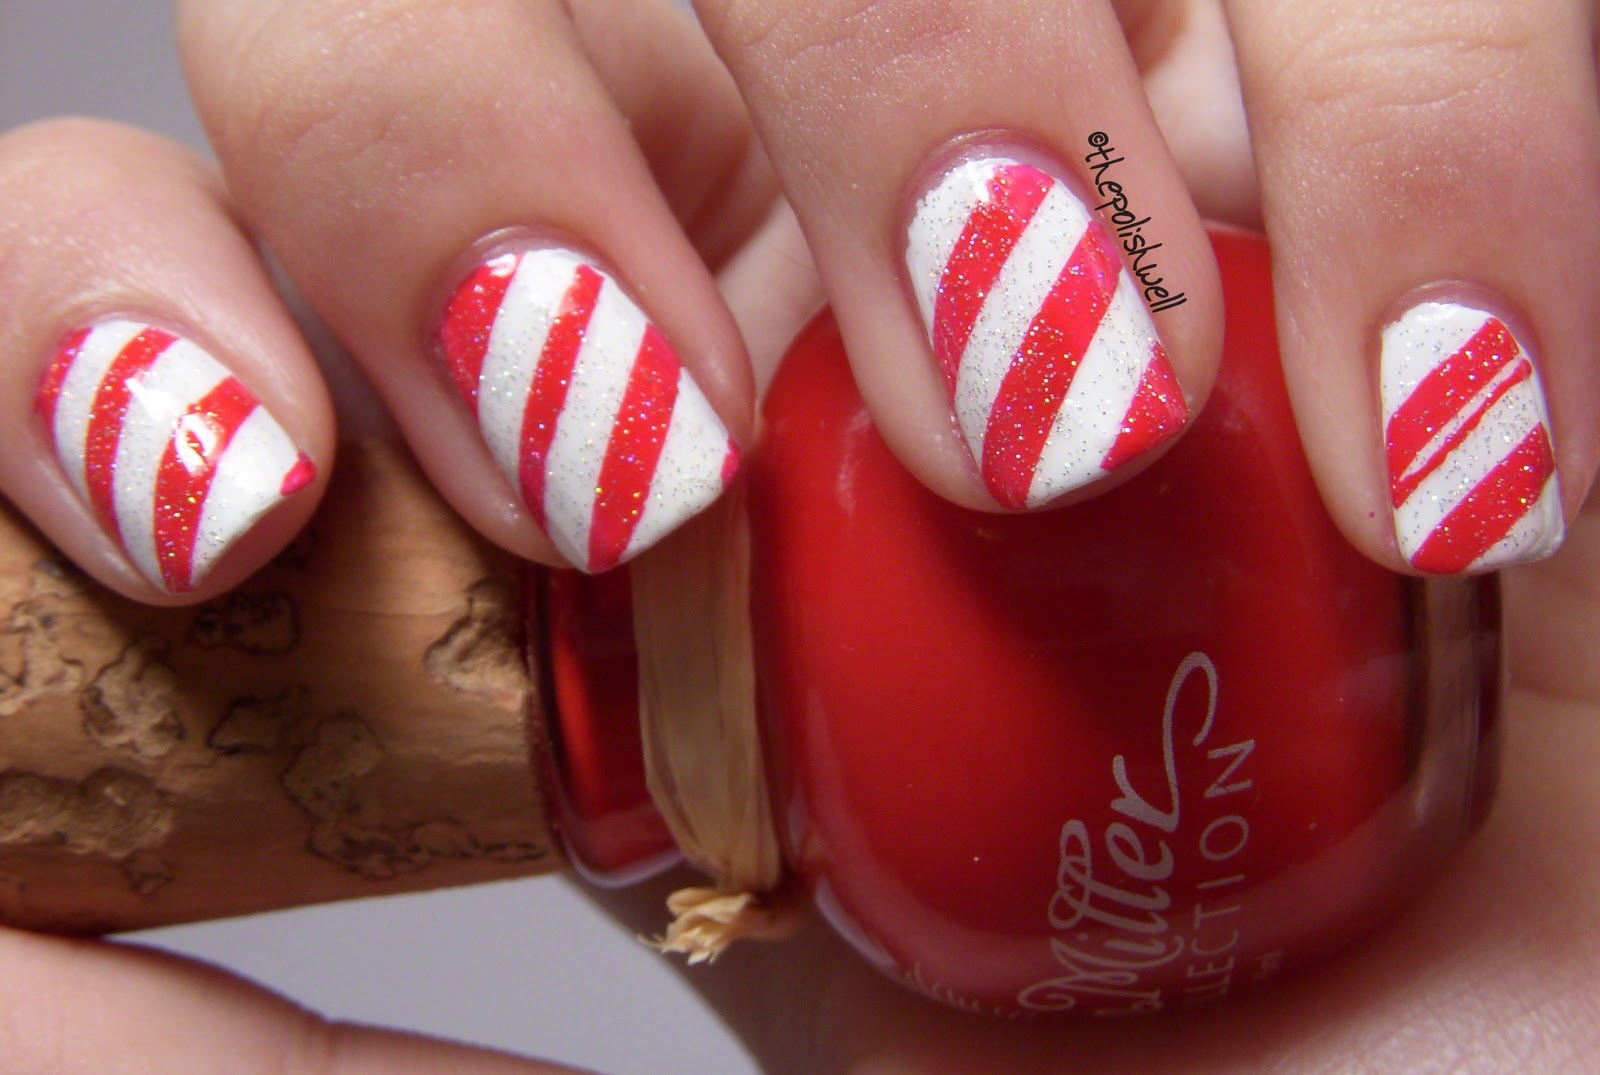 6. "Candy Cane Nail Art" - wide 4